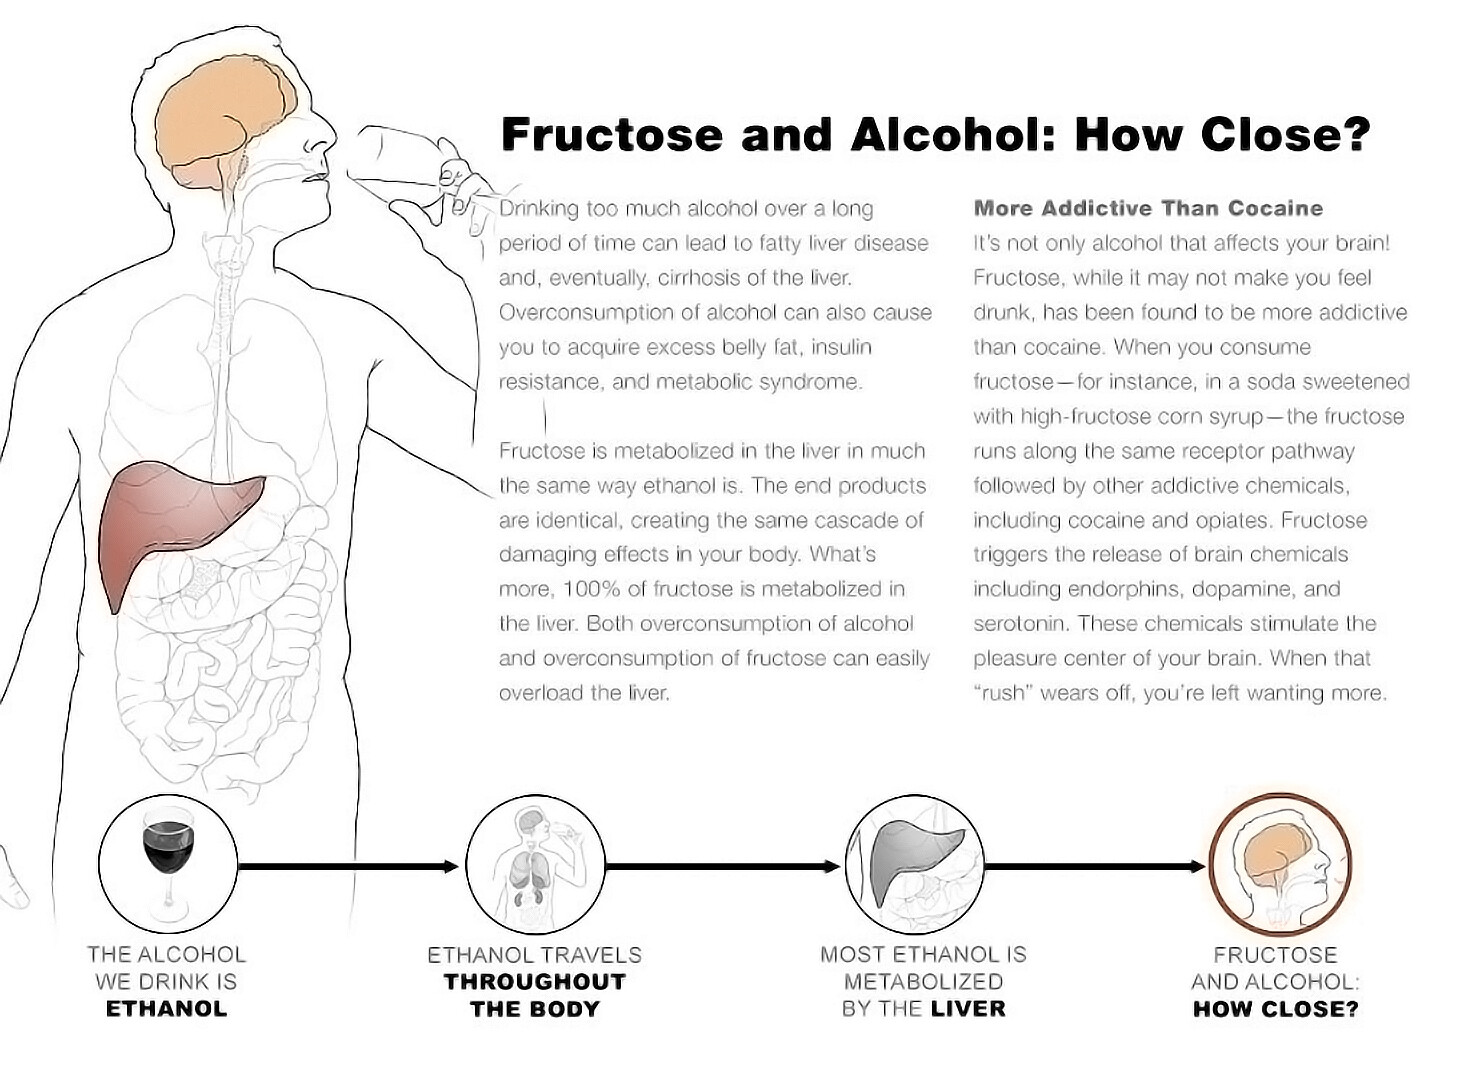 Effects of Alcohol on Each Part of the Body